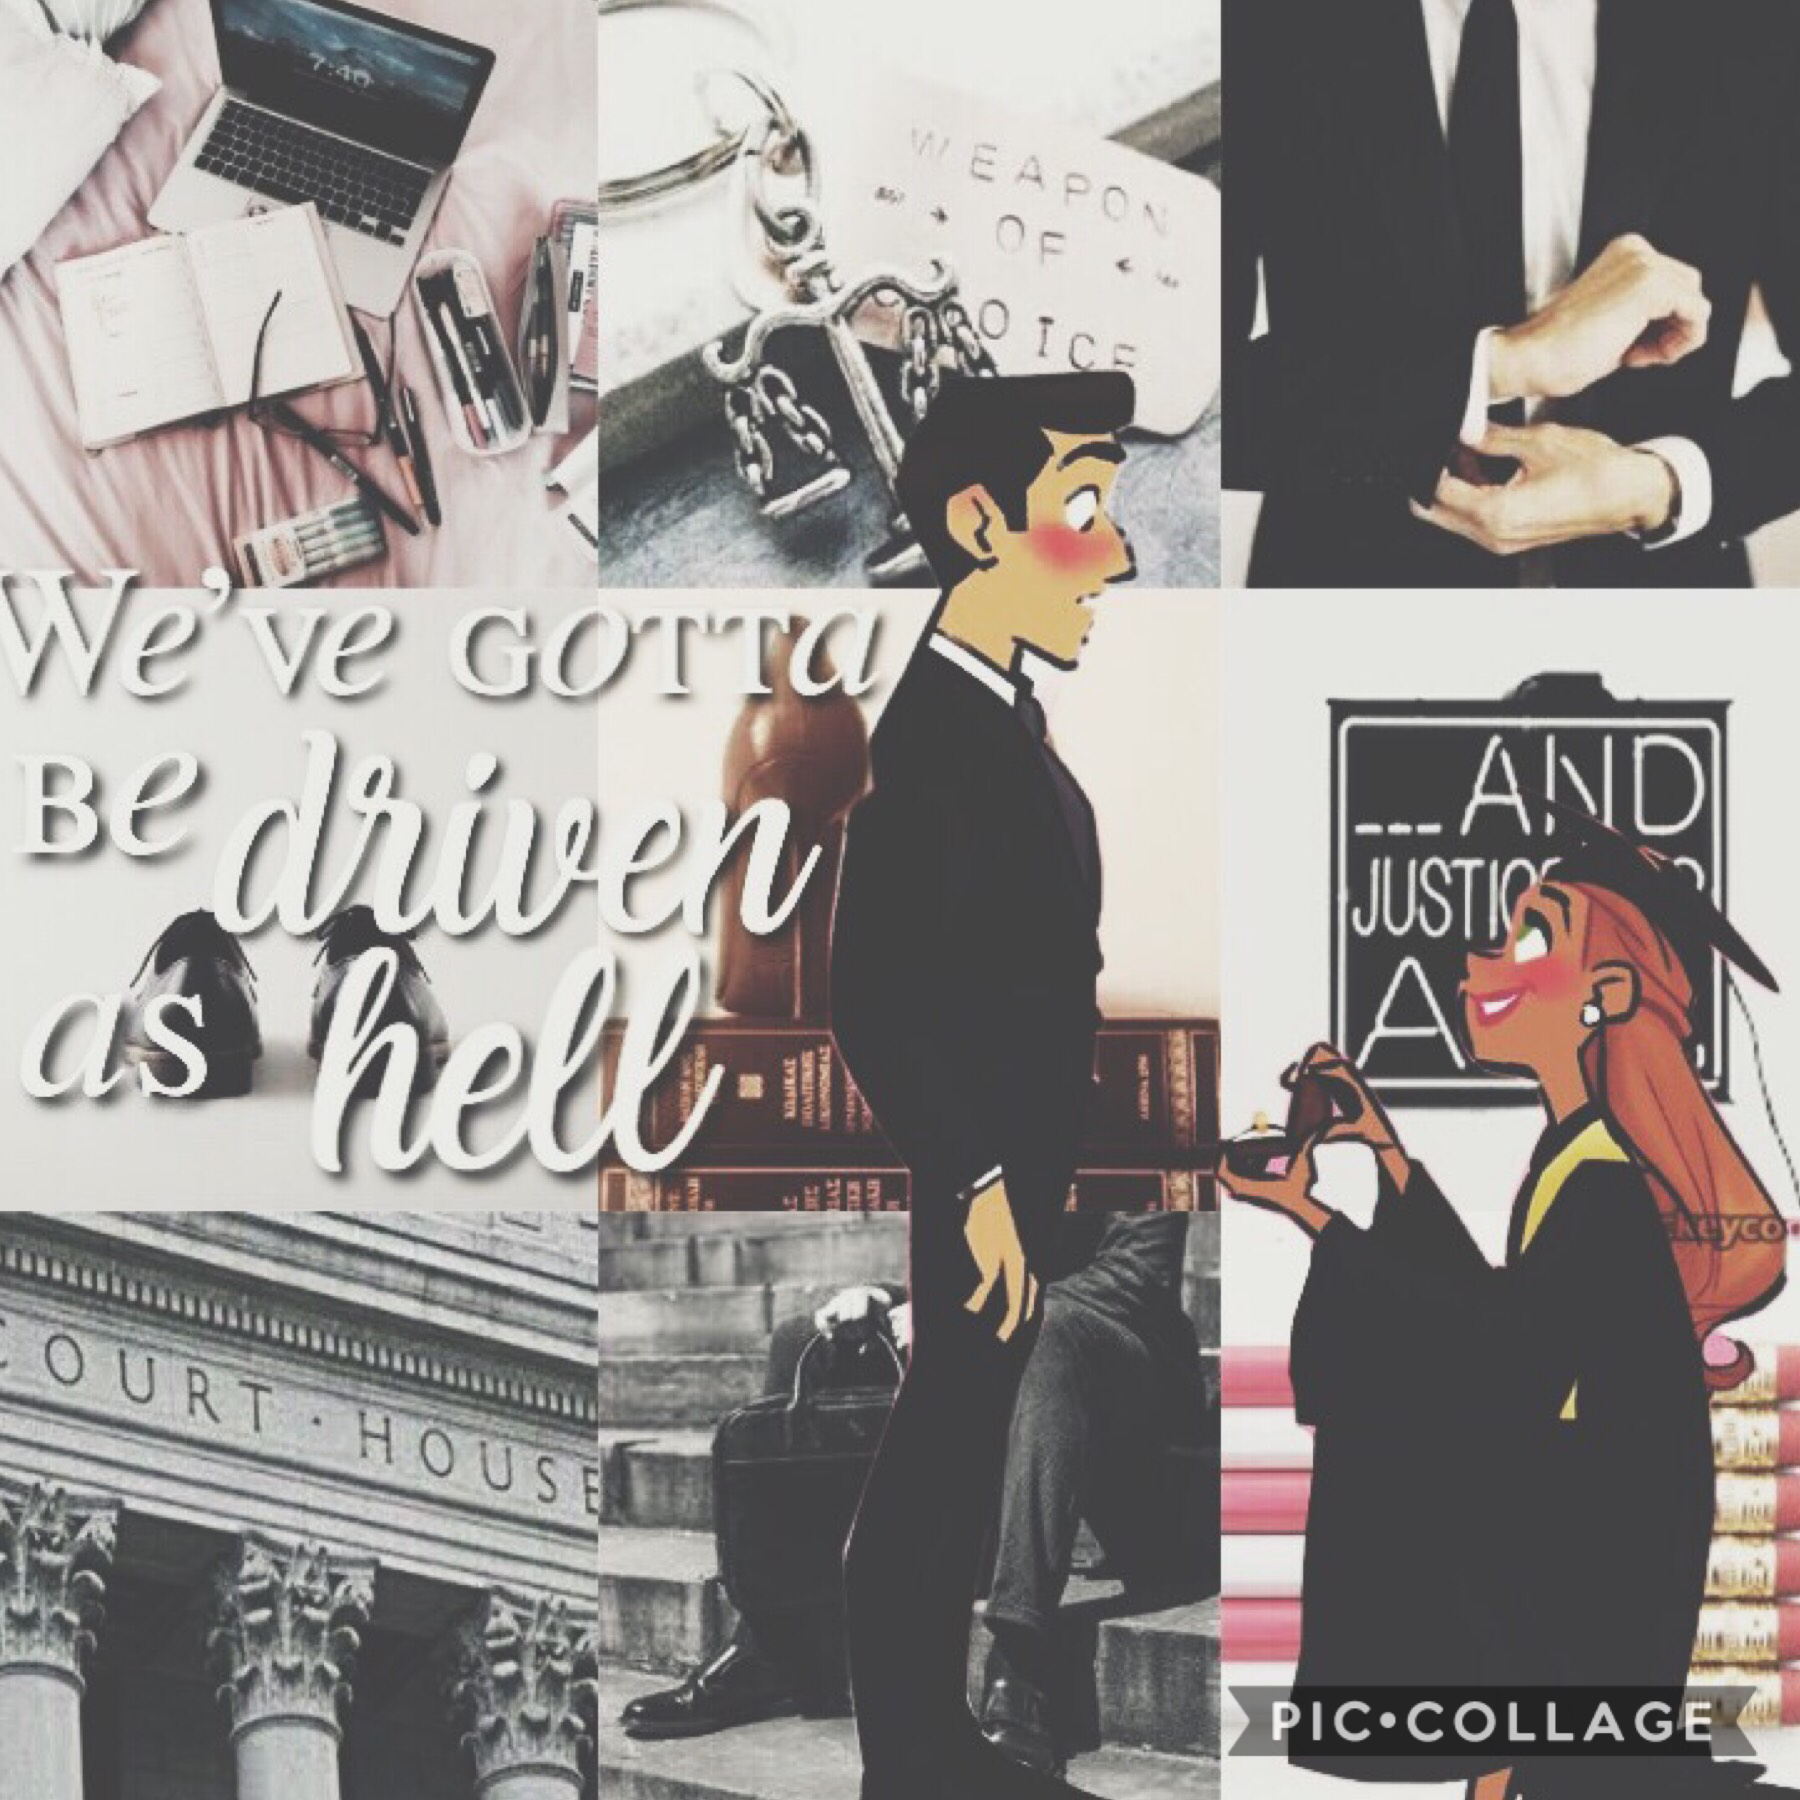 Legally Blonde edit! IM SO OBSESSED WITH THIS MUSICAL
QOTD: book you are currently reading?
AOTD: Harry Potter and A Court of  Frost and Starlight